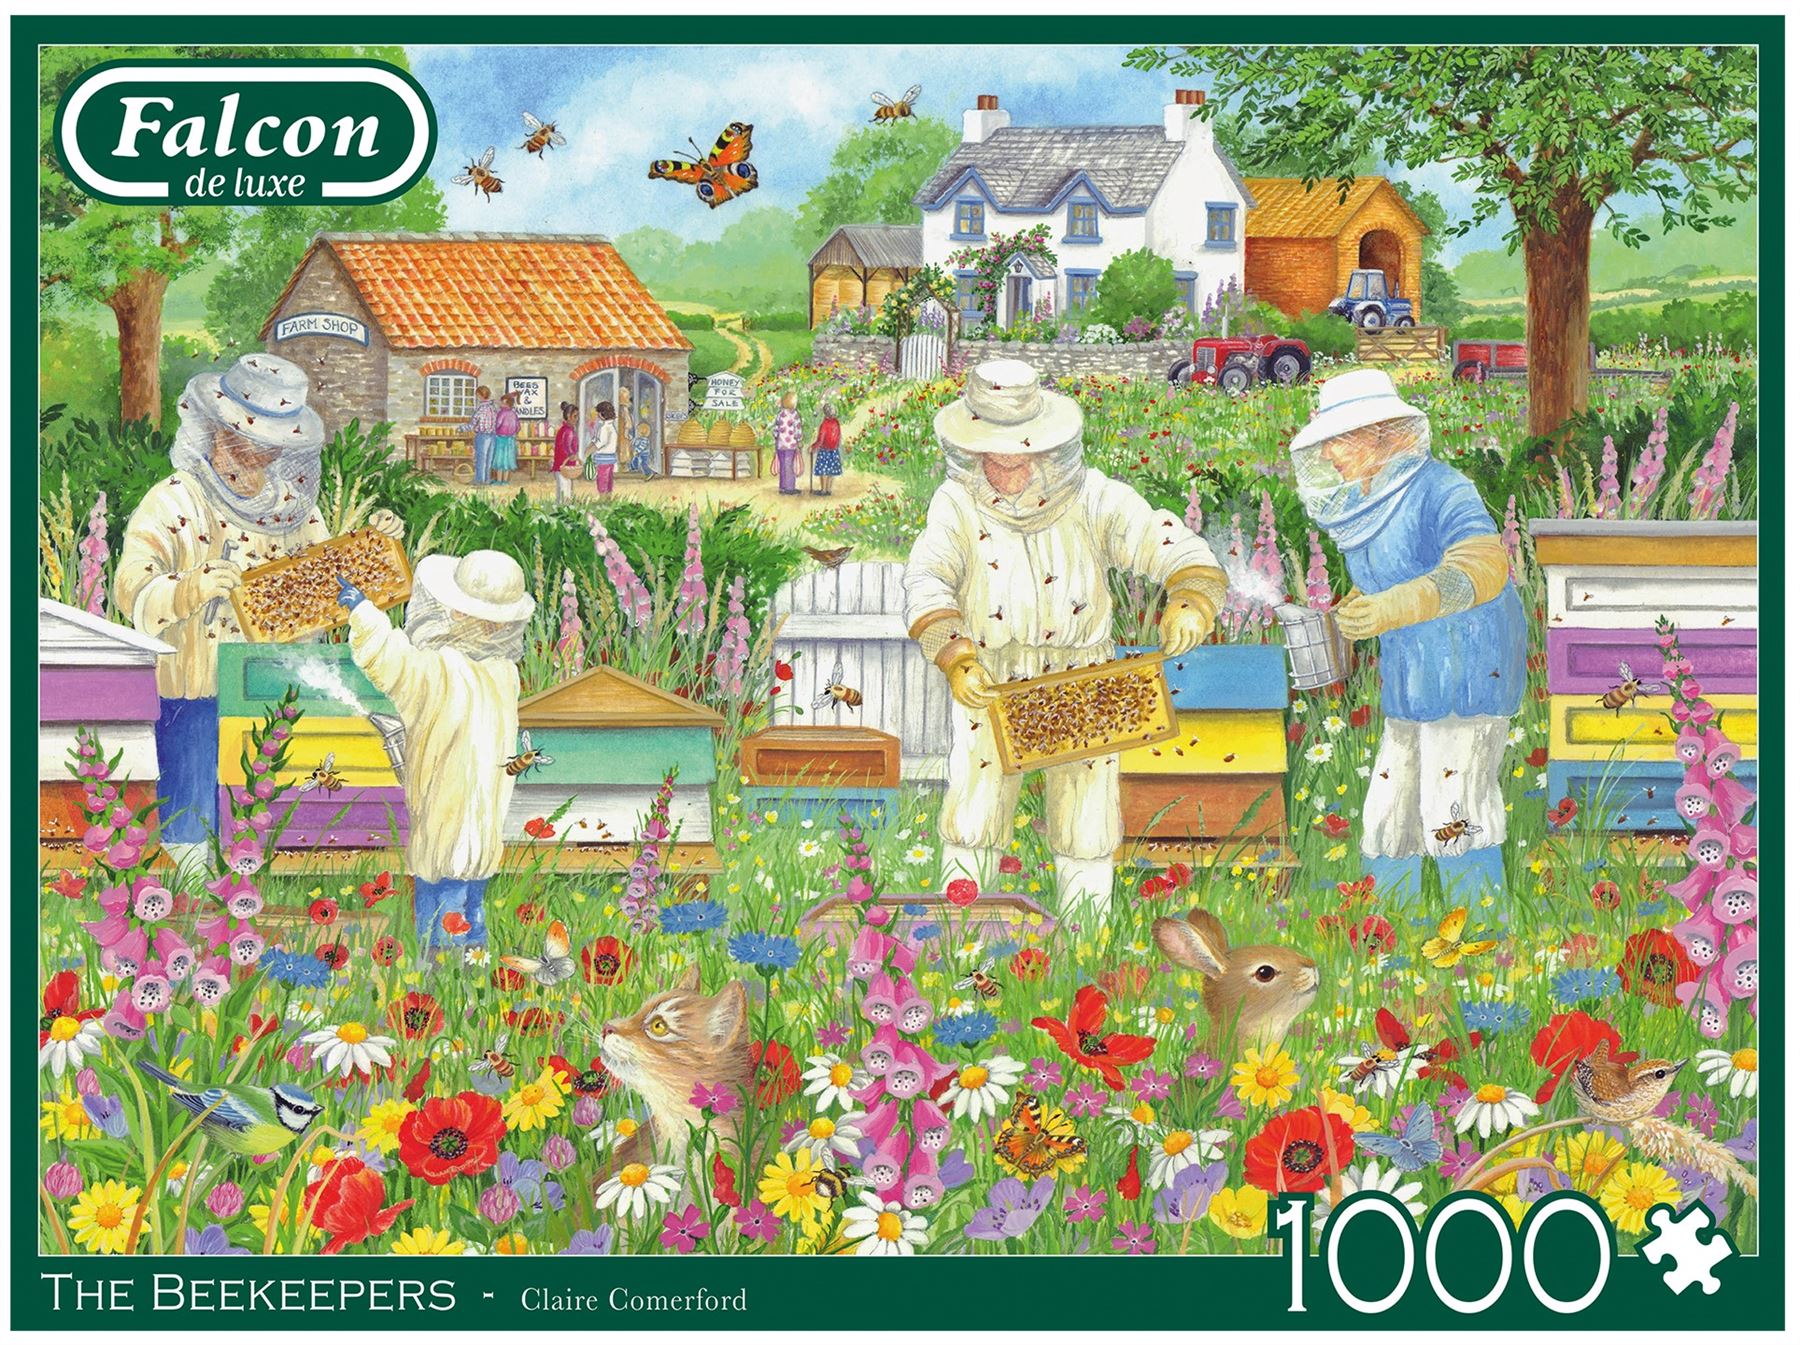 The Beekeepers 1000 Piece Jigsaw Puzzle box